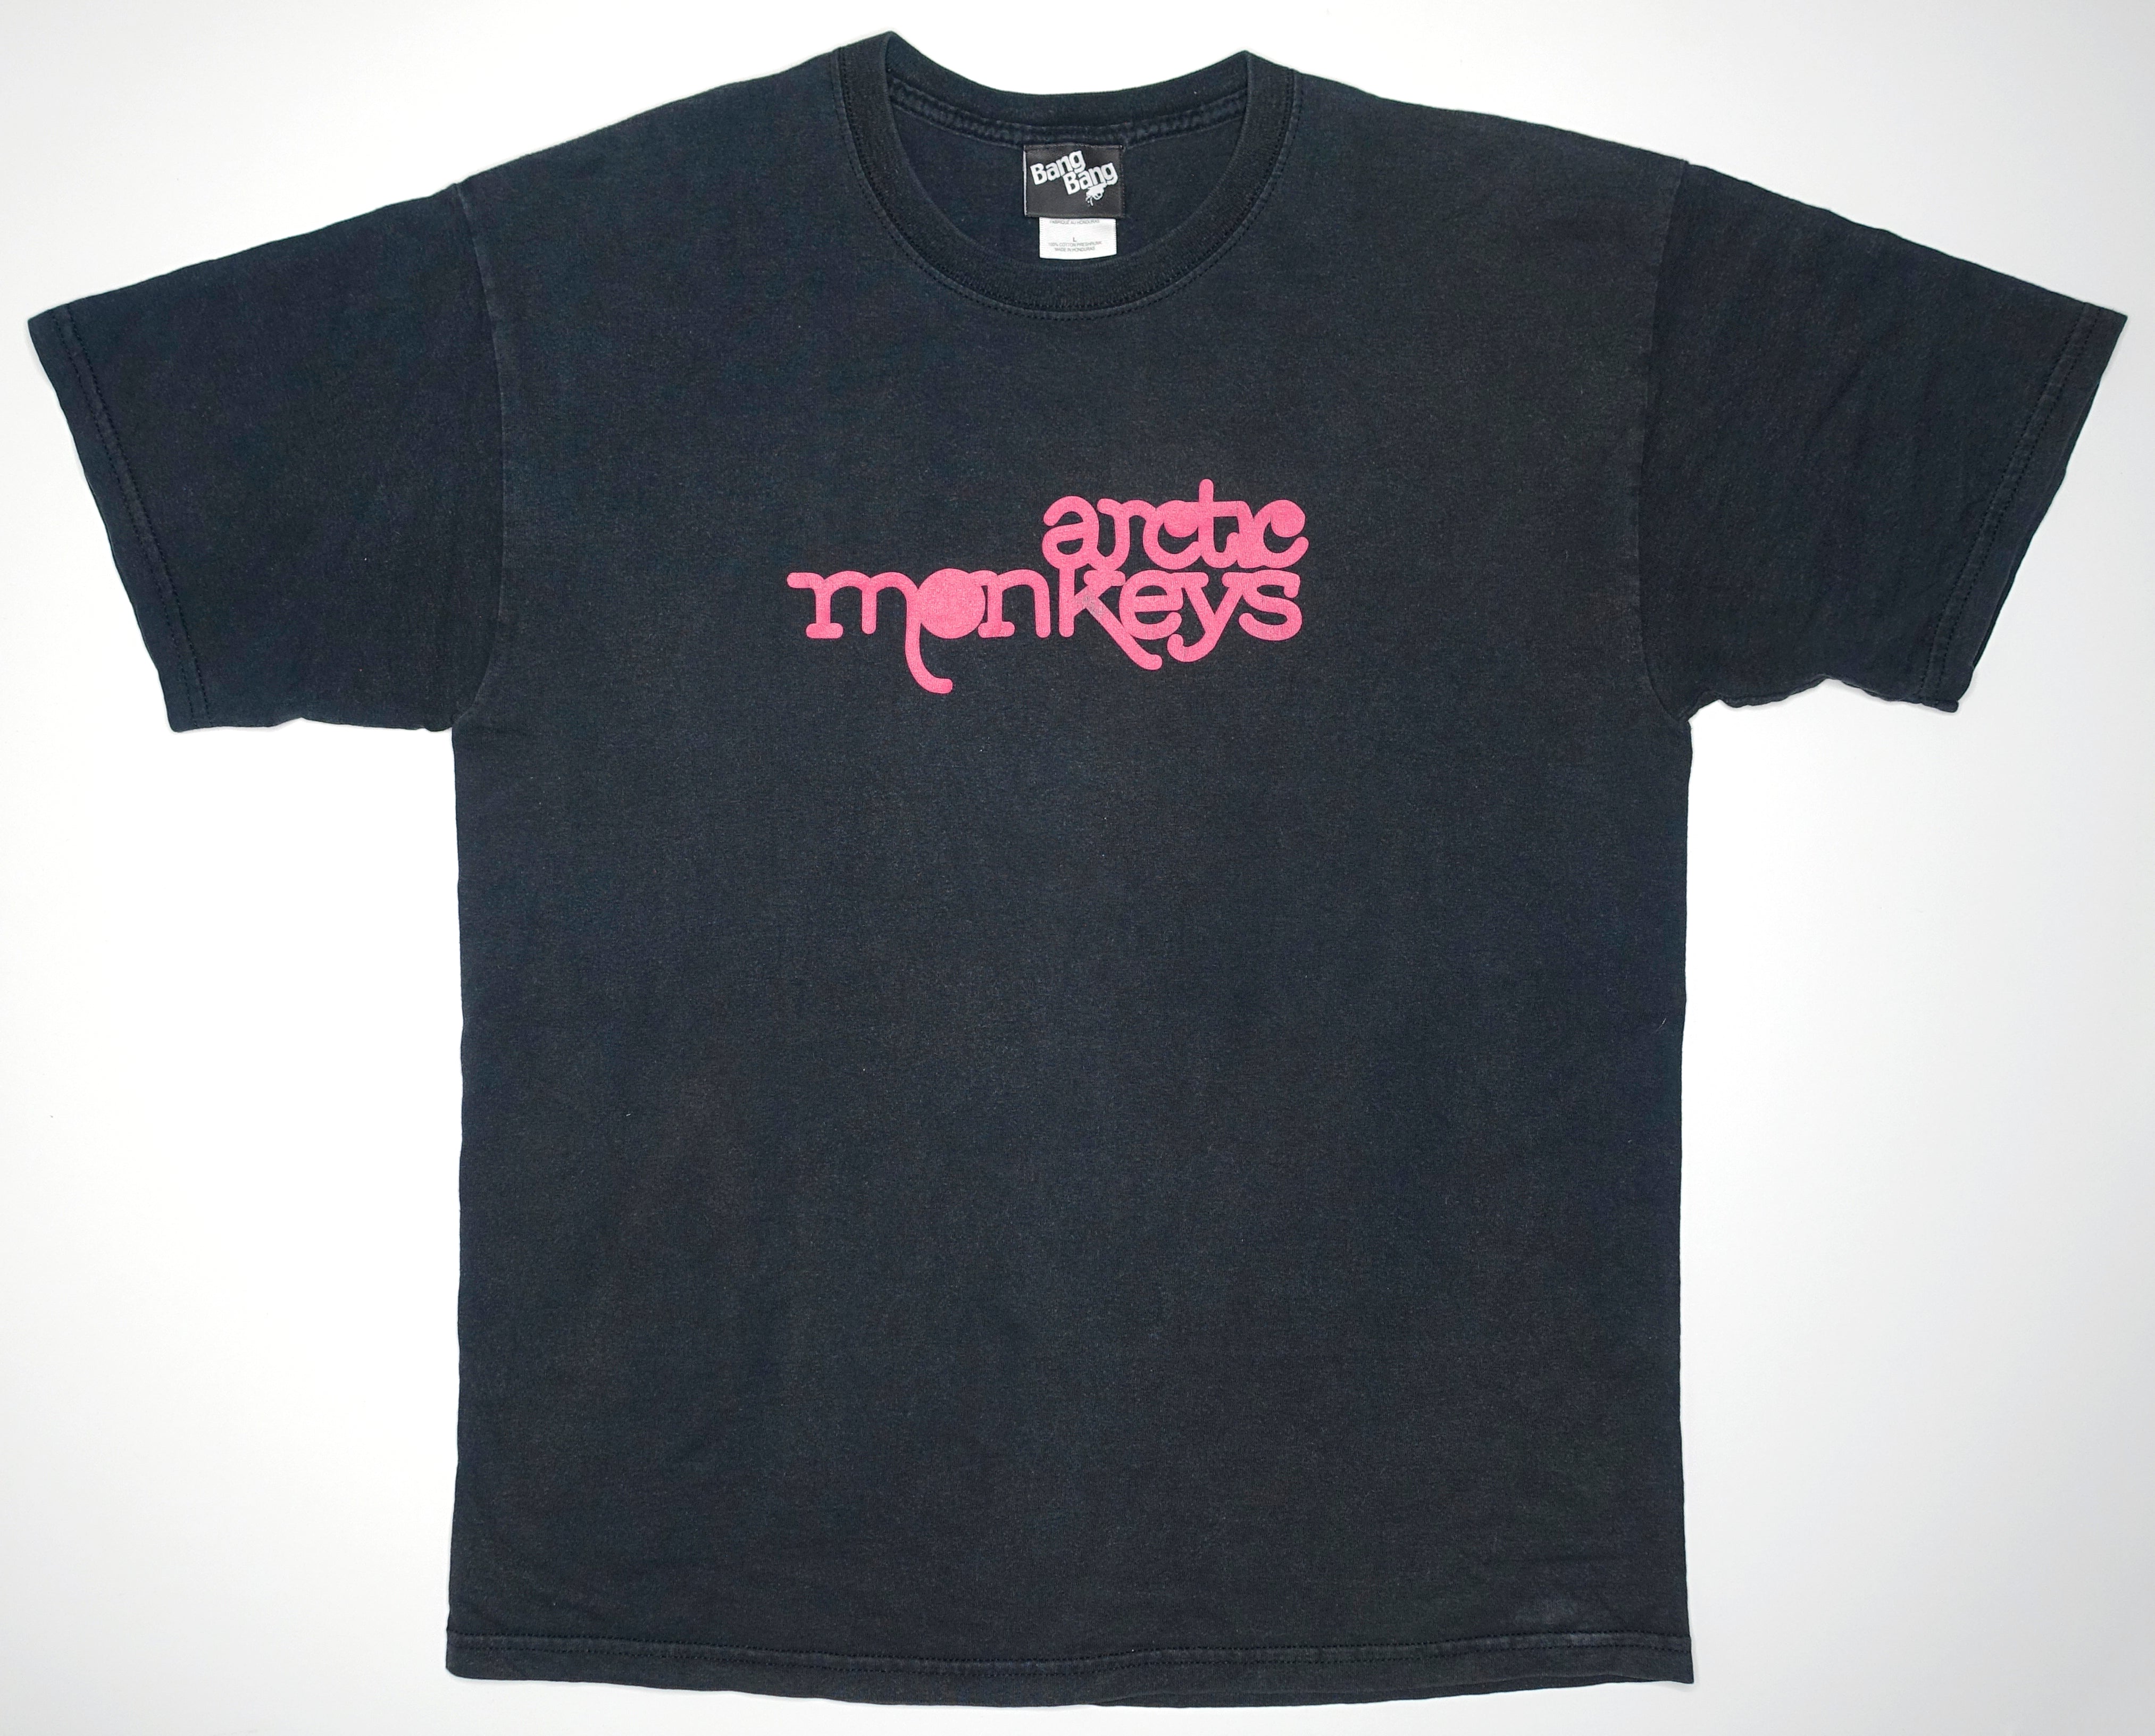 Arctic Monkeys - Whatever People Say I Am, That's What I'm Not Tour Shirt Size Large